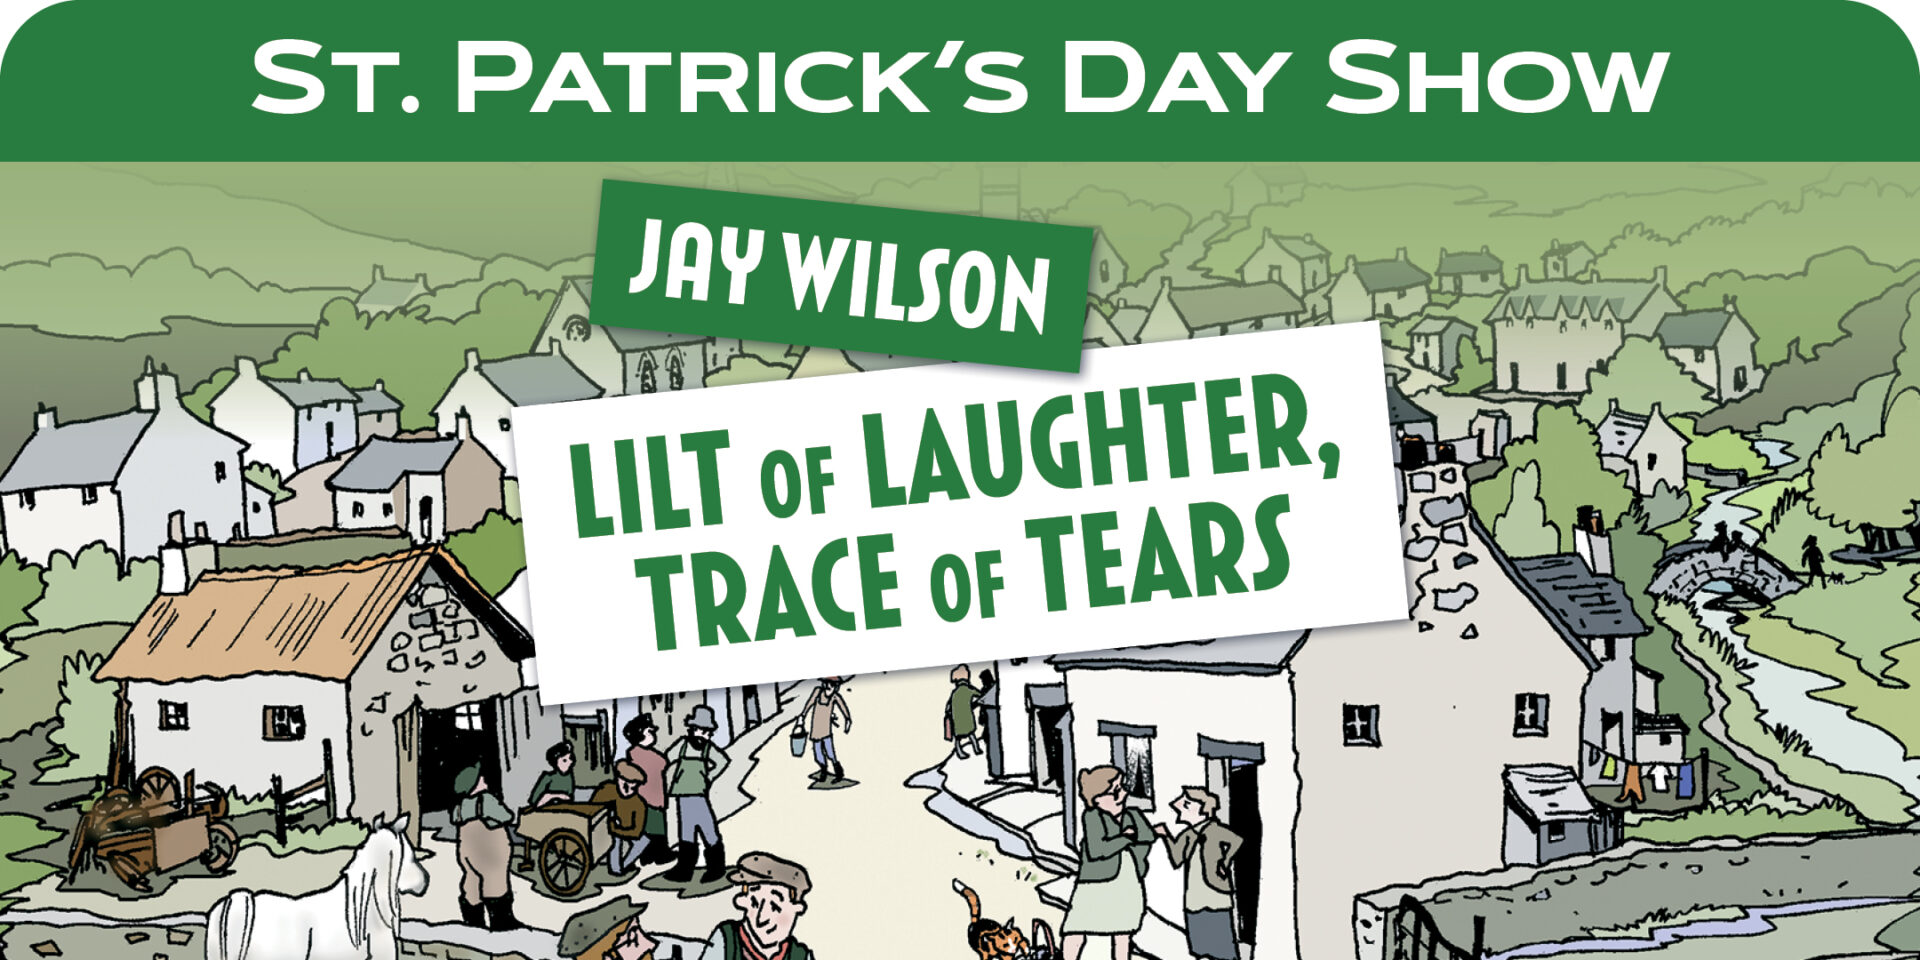 Graphic with a village with people going about their day. Text reads St Patricks Day Show, Jay Wilson Lilt of laughter, Trace of Tears